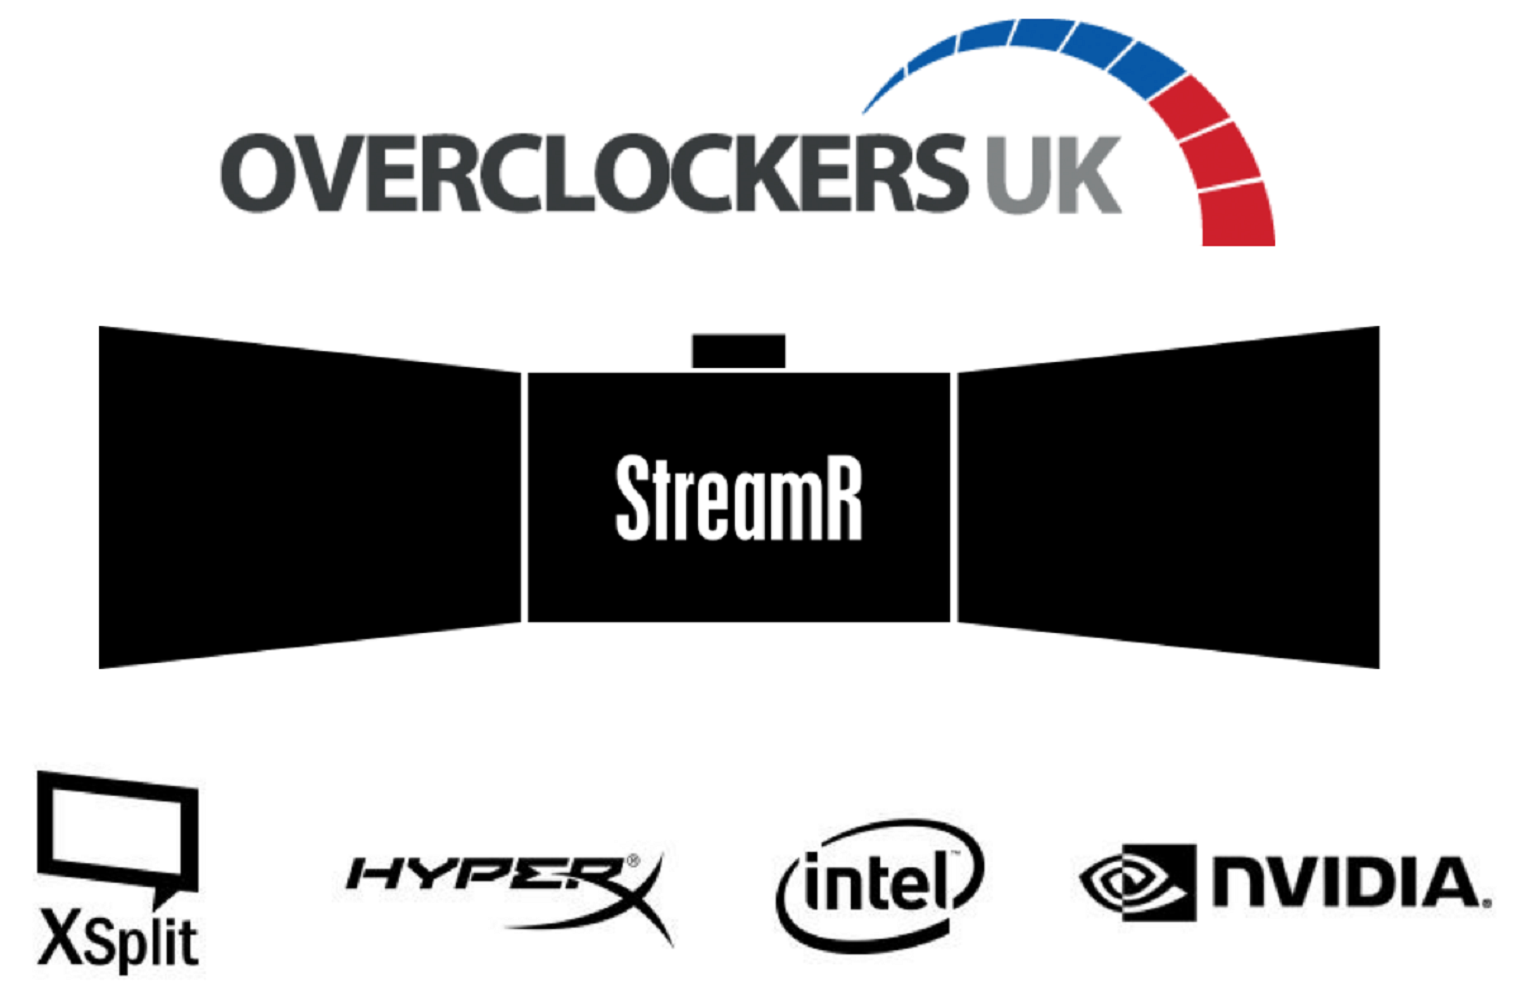 Overclockers UK introduce new StreamR systems 